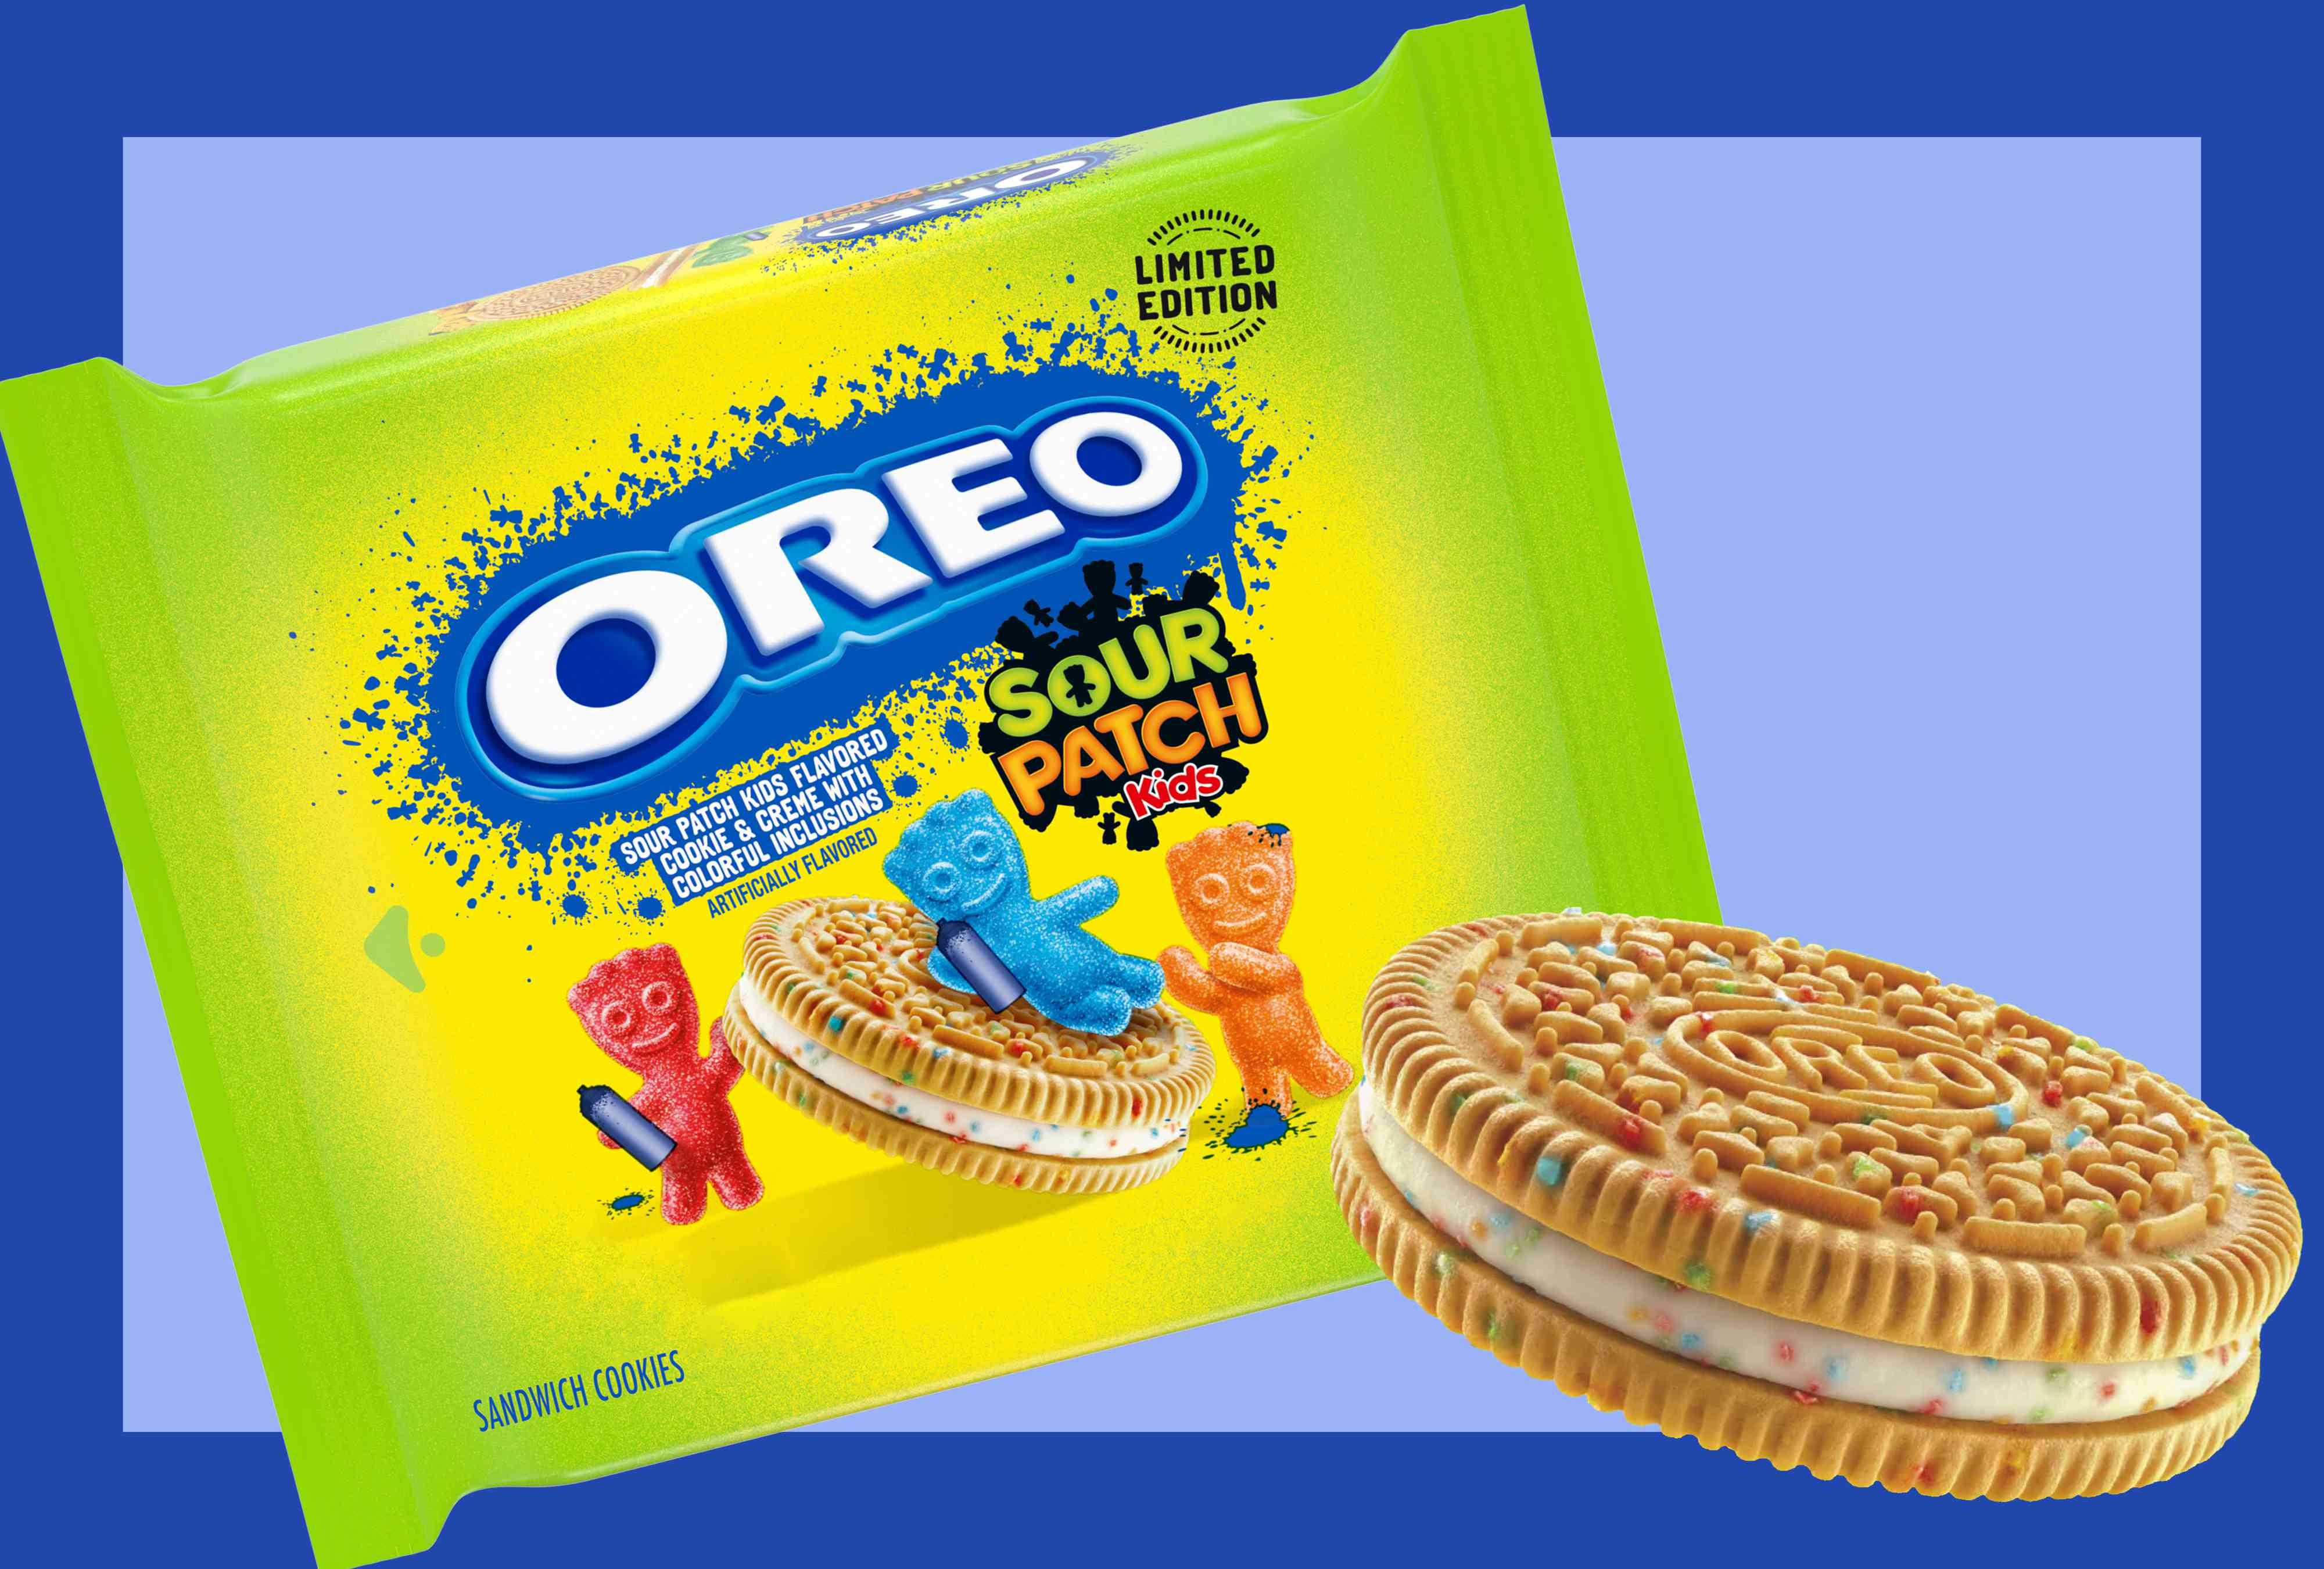 oreo is releasing a limited-edition cookie made with sour patch kids — here's when you can get it